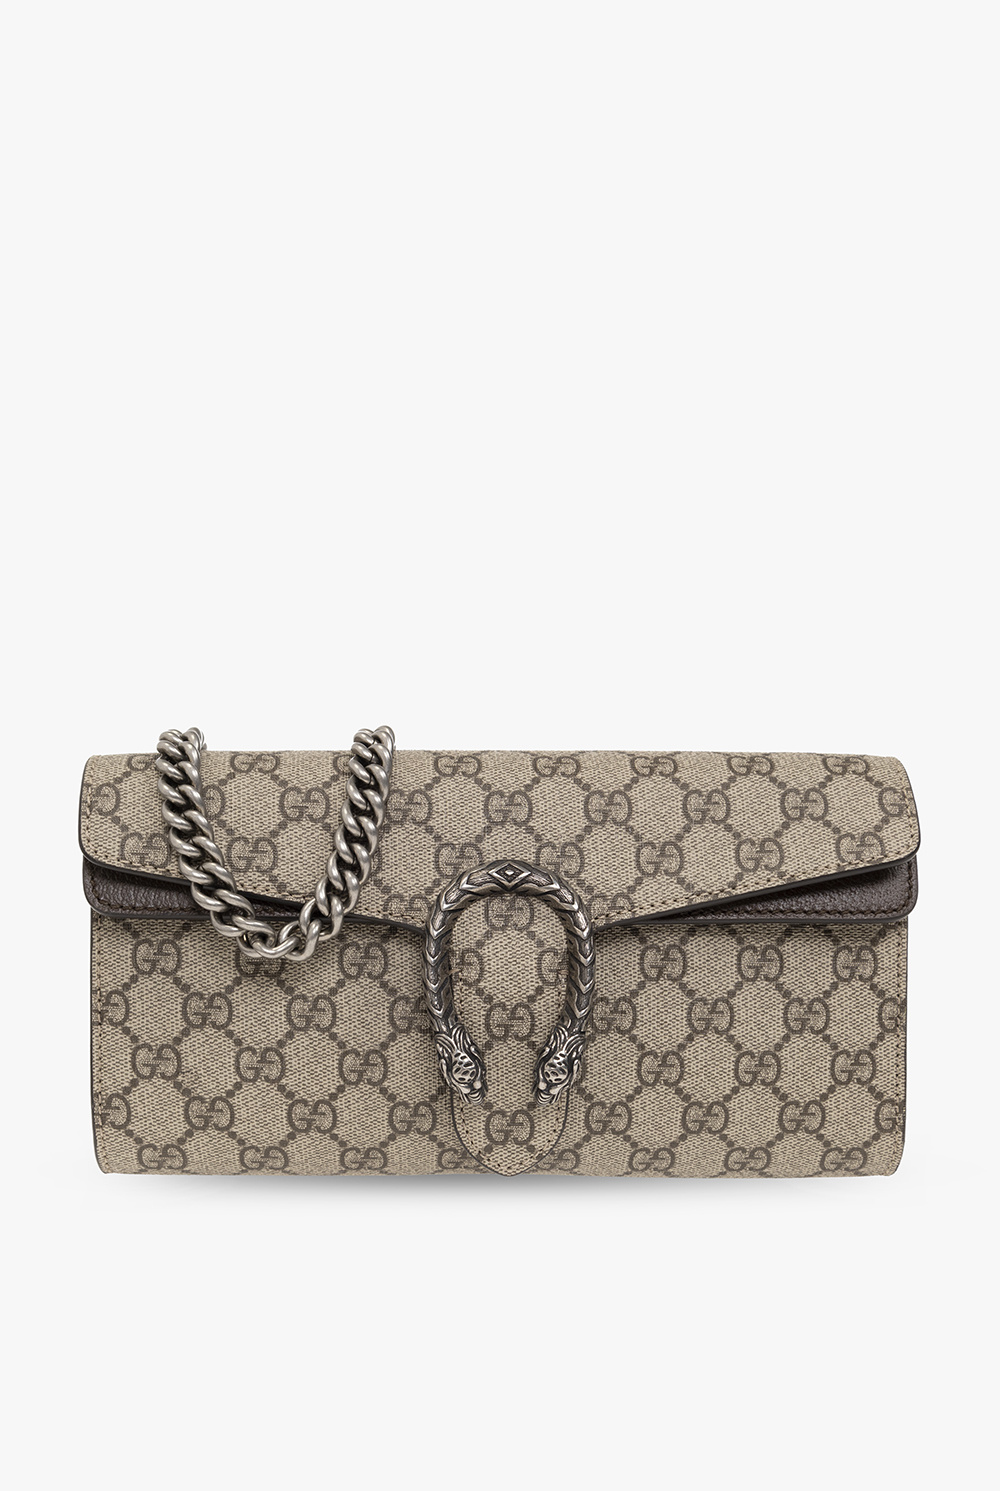 Gucci Dionysus Full 2023 Review. Is it still a good buy? - Luxe Front